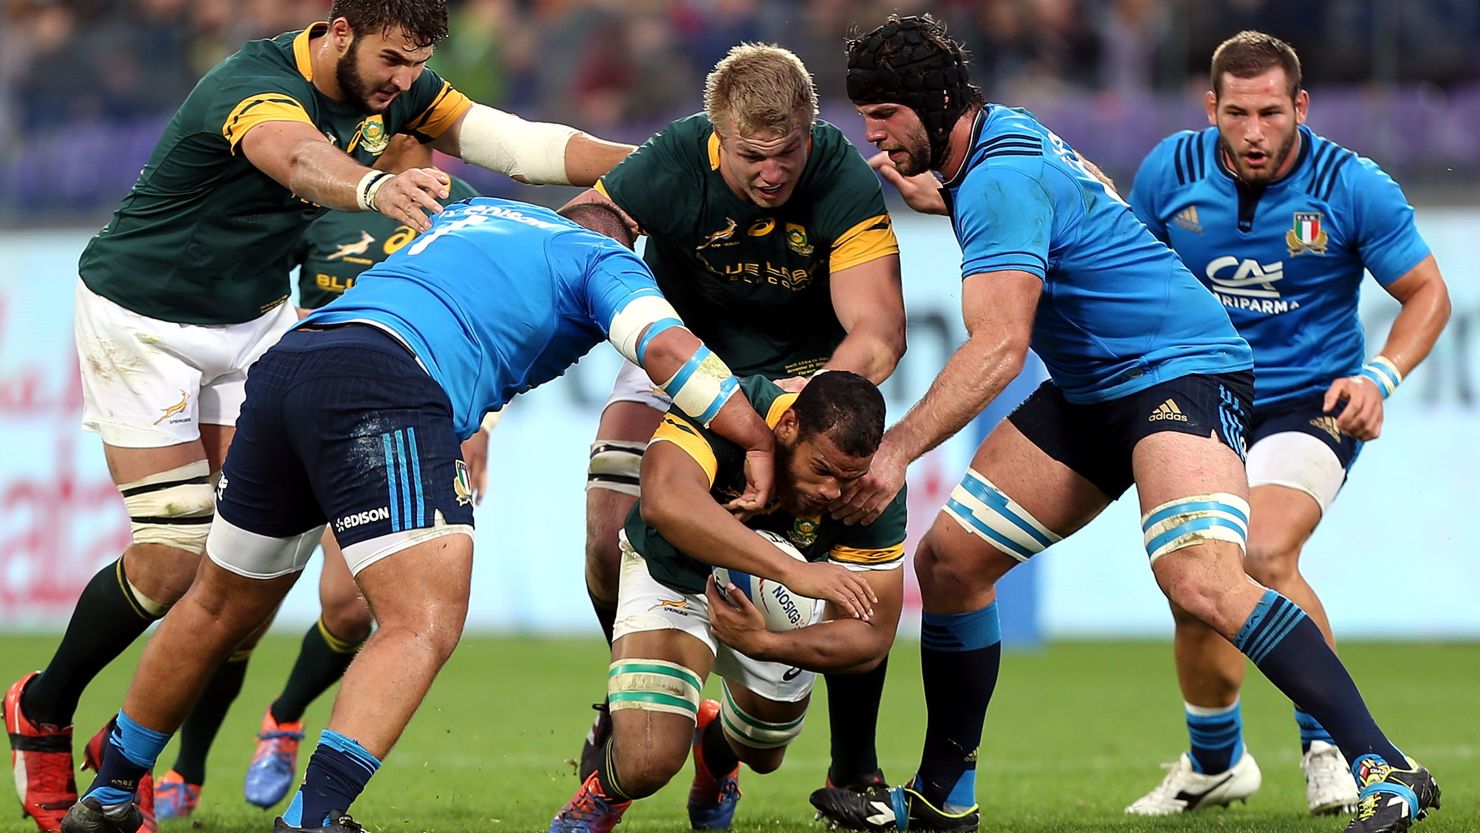 South Africa has won only one of its last seven international matches.